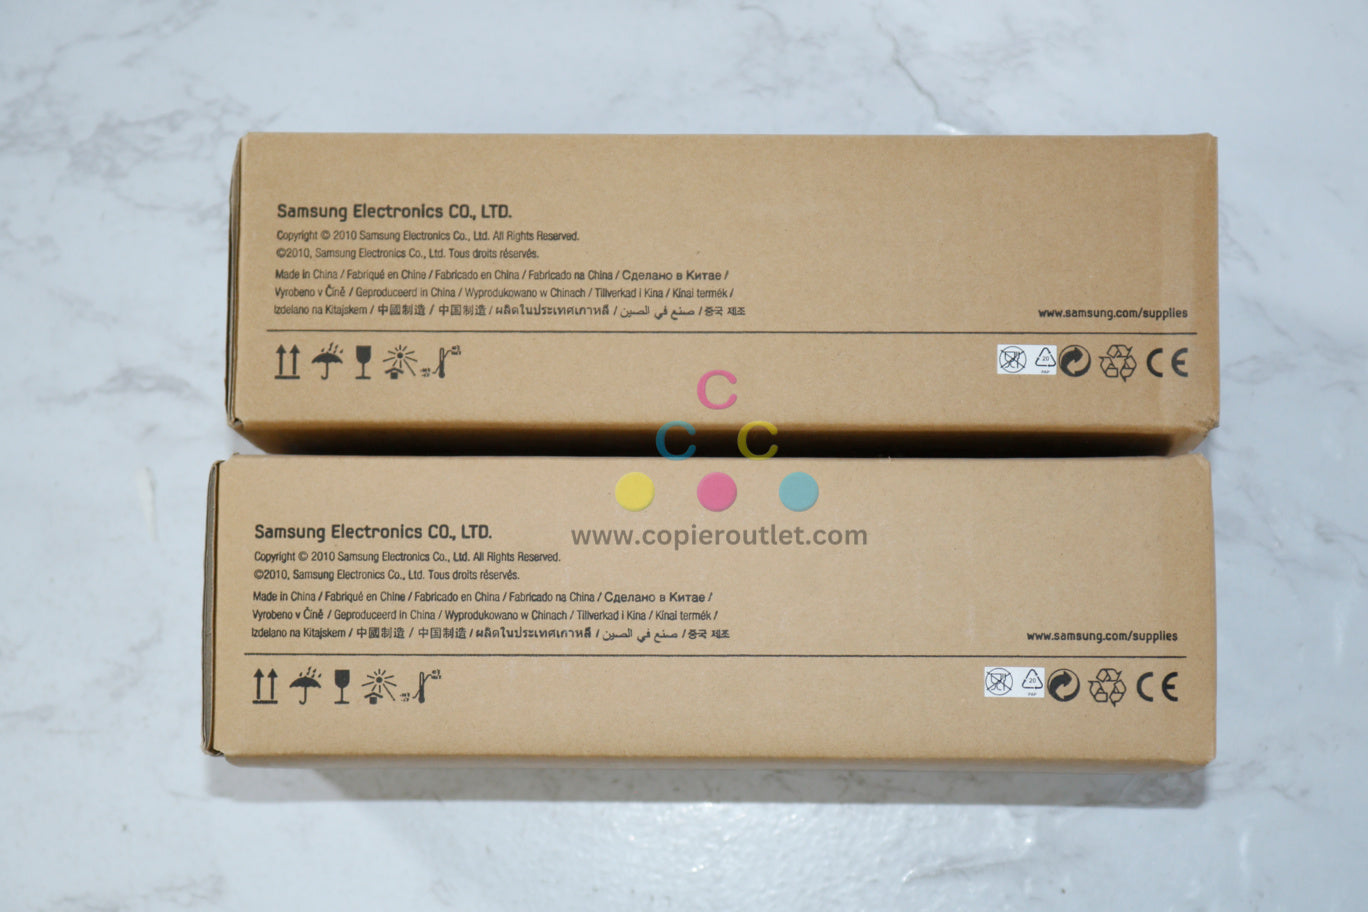 2 New OEM Samsung SCX-8030ND Waste Toner Container MLT-W606 (MLTW606)